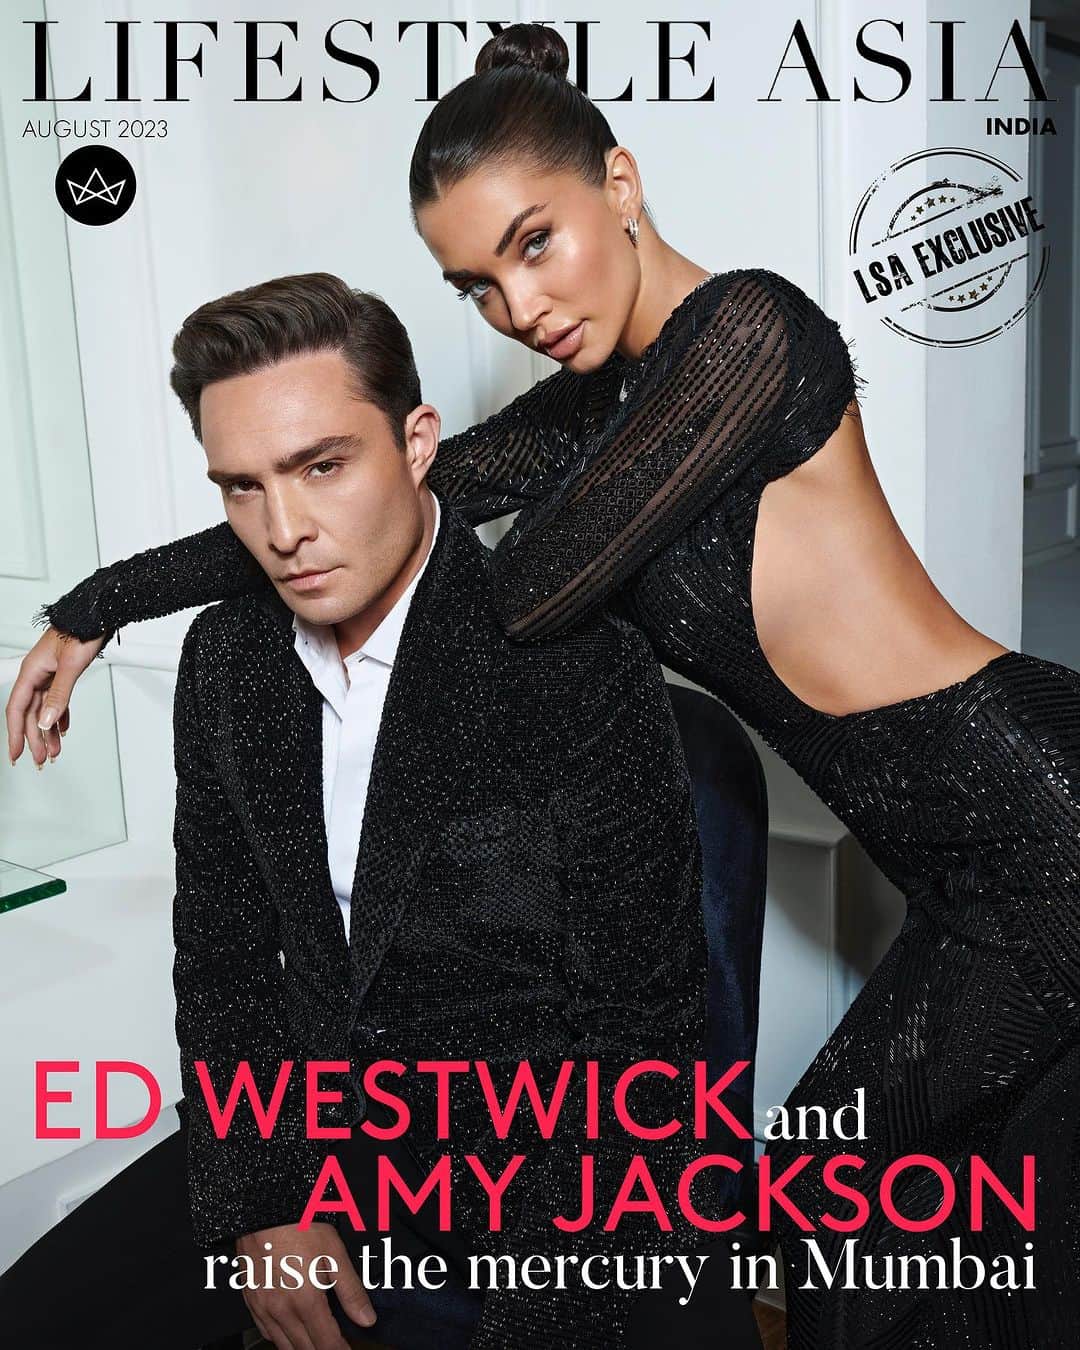 エド・ウェストウィックさんのインスタグラム写真 - (エド・ウェストウィックInstagram)「Just a few days ago, the charismatic duo of Amy Jackson (@iamamyjackson) and Ed Westwick (@edwestwick) lit up Mumbai with their unexpected appearance. From capturing adorable selfies at the iconic Gateway of India to mingling with the vibrant GenZ crowd, they truly became the talk of town. Everywhere you turned, you'd hear people excitedly discussing "Chuck Bass being in the city". Amy's return to the country to film her next project was a treat for her fans, providing them with countless Pinterest-worthy moments. Amidst all the excitement, we spent a day with these two stars, resulting in our August 2023 cover.  Amy is wearing a black evening gown crafted with hand-embroidered black crystals, swarovskis and bugle beads from Manish Malhotra's (@manishmalhotraworld) 2023 couture collection while Ed sports a classic Manish Malhotra black bugle and Swarovski embellished blazer paired with a winged tip collar pleated shirt and slim black pants.  Editor-in-Chief: Rahul Gangwani (@rahulgangs_) Photographer: The House of Pixels (@thehouseofpixels) Stylist and creative director: Mohit Rai (@mohitrai)  Assisted by: Shubhi Kumar (@shubhi.kumar) Amy’s HMU: Mehak Oberoi (@mehakoberoi) Ed’s Makeup: Vishakha Jain (@makeupbyvishakha) Ed’s Hairstyling: Leo from Team Aalim Hakim (@aalimhakim) Interview by Mayukh Majumdar (@mayuxkh) Location: Sofitel BKC (@sofitelmumbaibkc) Artiste Management: Viniyard Films (@viniyardfilms) - Jubin Rajesh Desai (@jubinrajeshdesai), Deepa Doshi (@doshideepa) Shoot produced by: Analita Seth (@analitaseth) Jewellery on Amy: Bulgari (@bulgari)   #EdWestwick #AmyJackson #LSAIndiaCover #LifestyleAsiaIndiaCover」8月7日 22時04分 - edwestwick